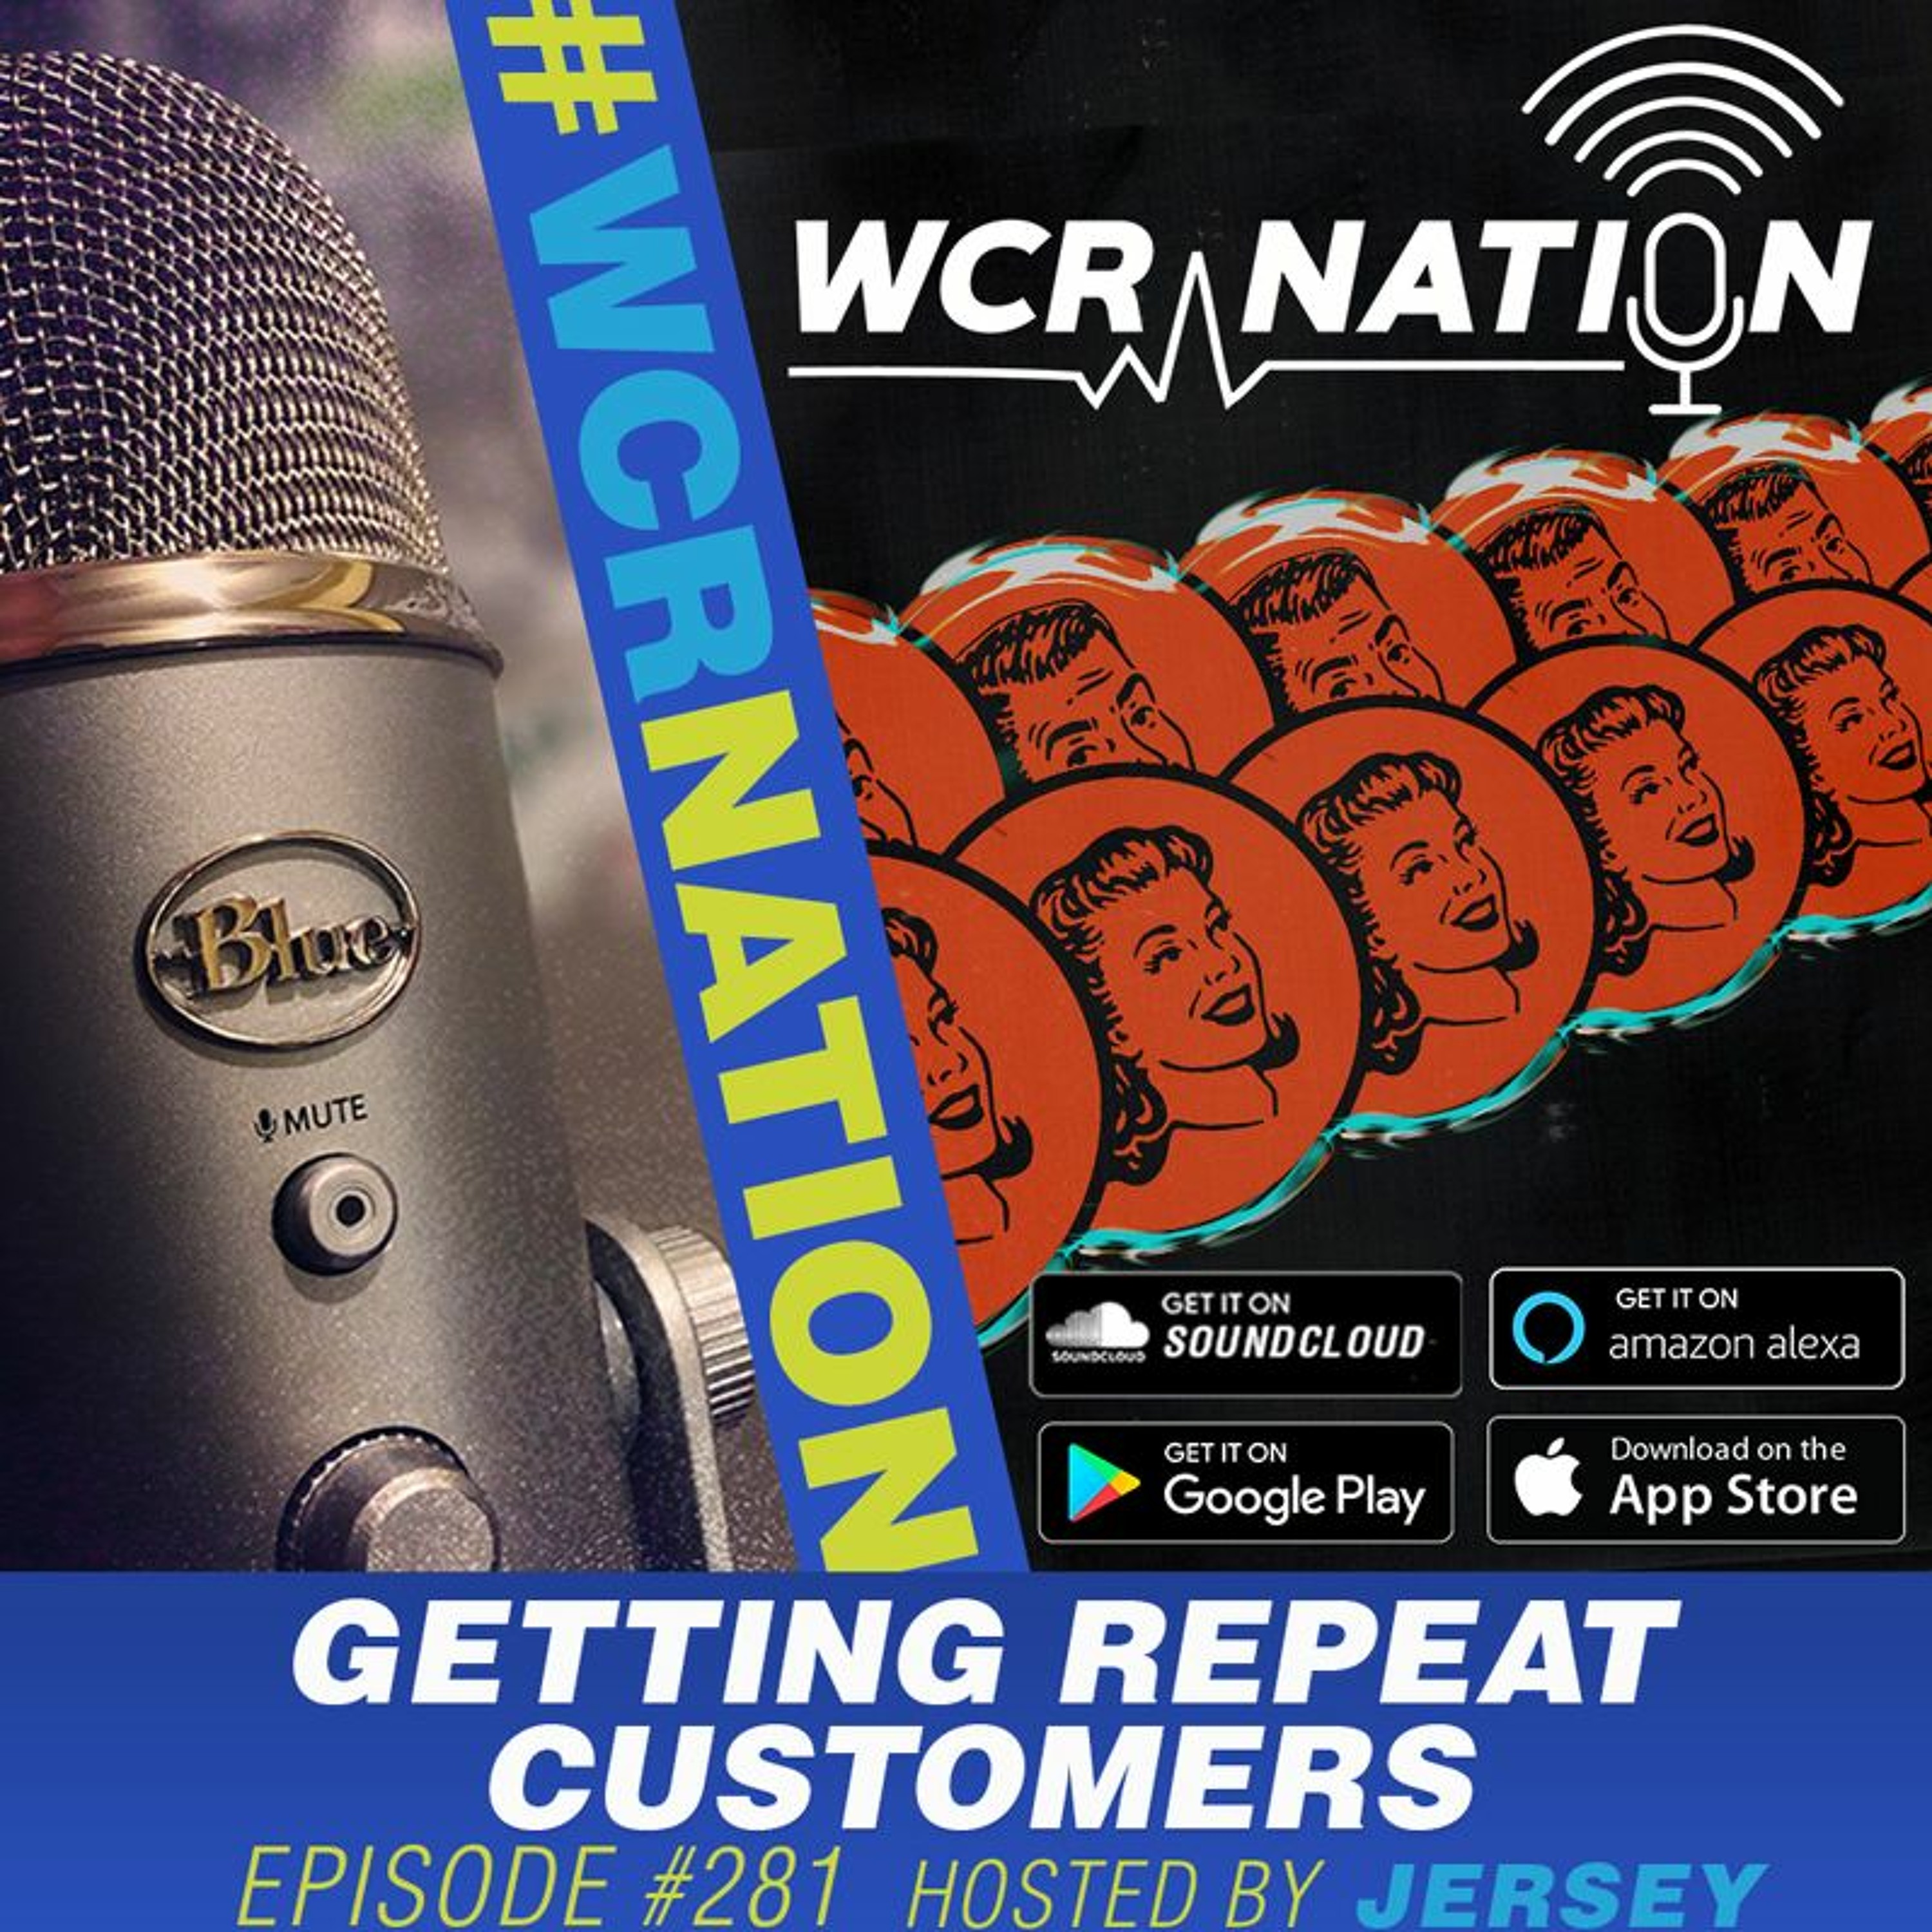 Getting Repeat Customers | WCR Nations Ep. 281 | A Window Cleaning Paodcast